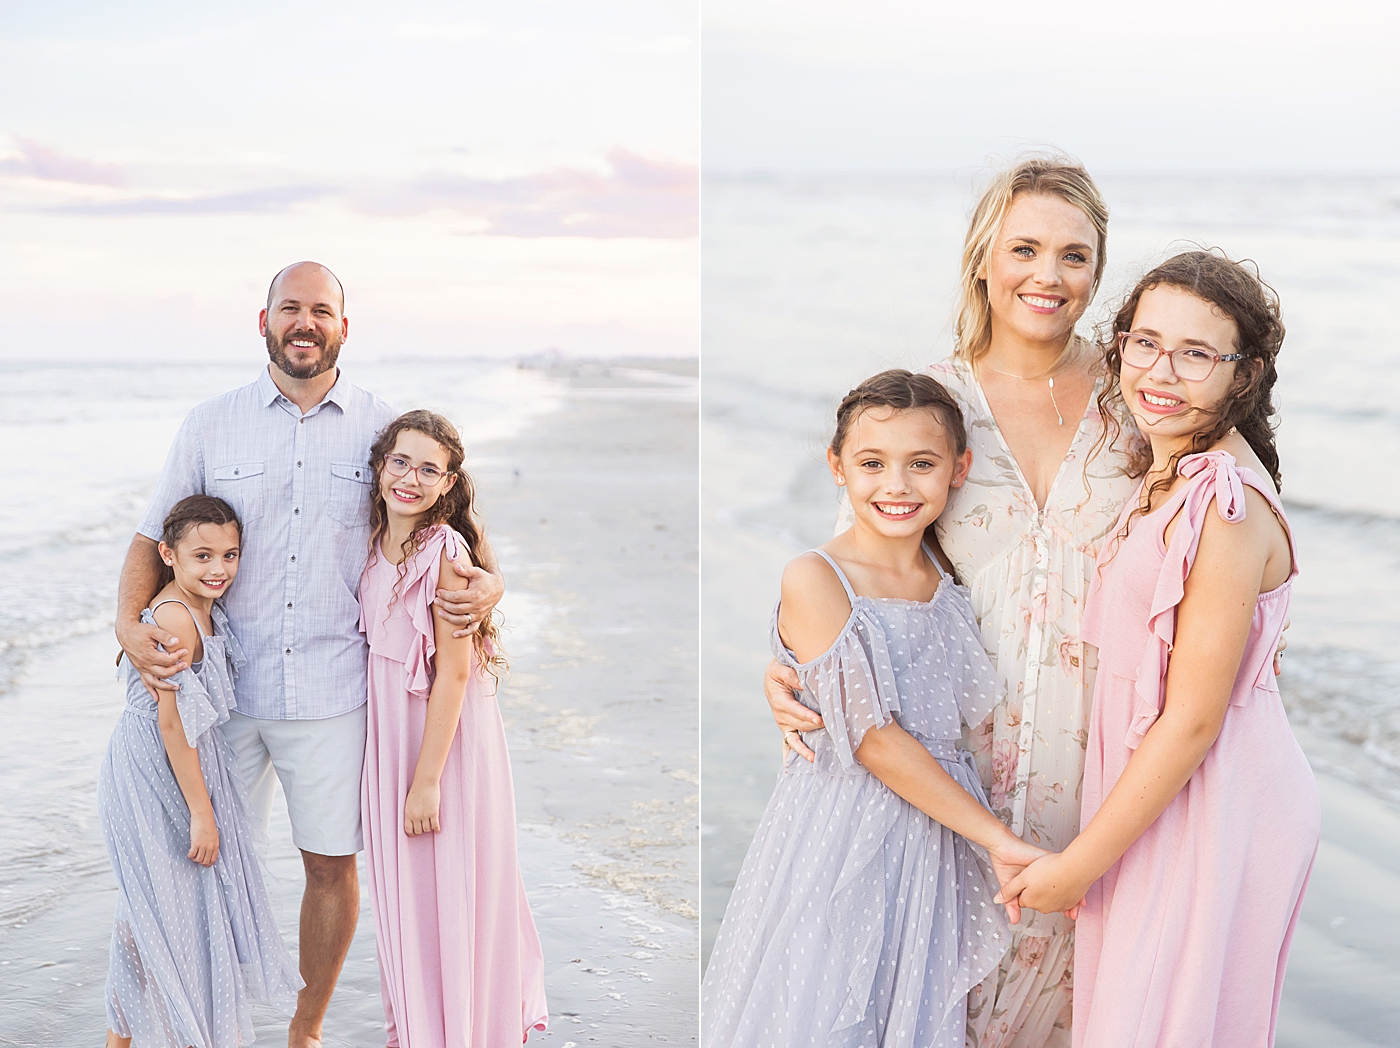 Mom and Dad with their two girls. Photo by Fresh Light Photography.